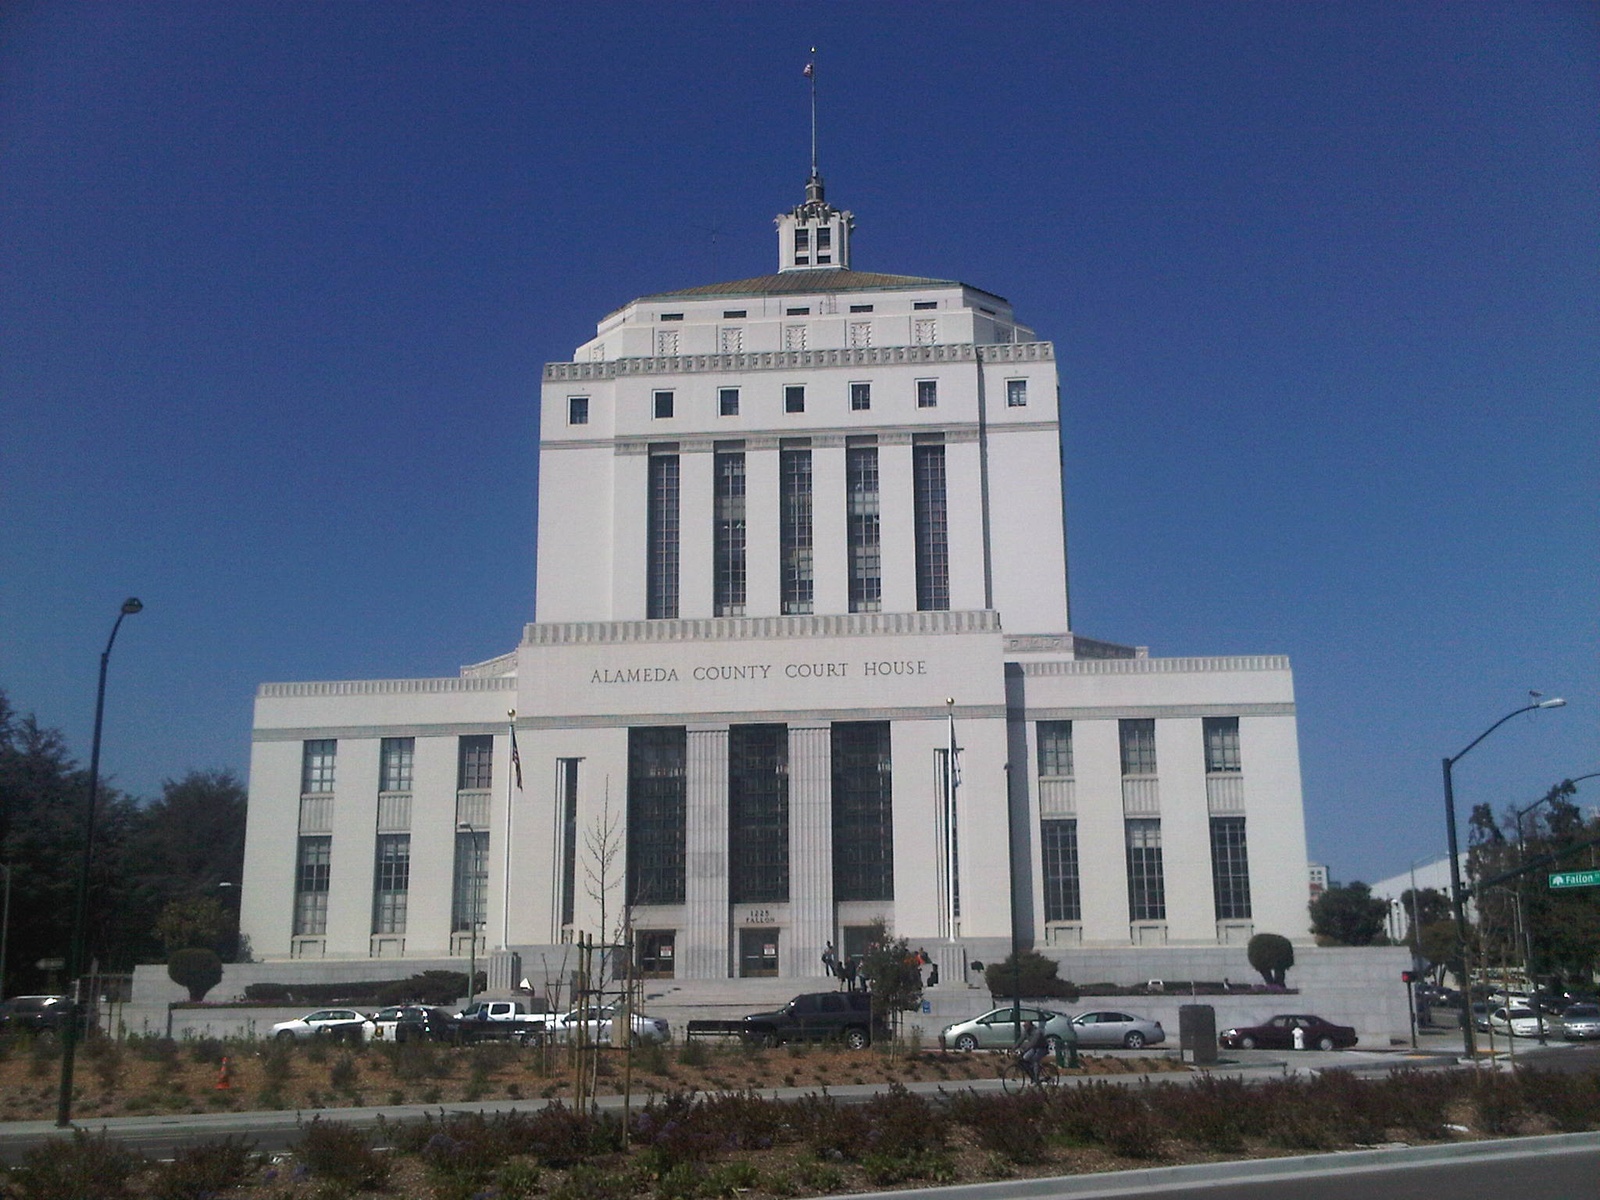 Information about "Alameda County Court House IMG2013032224169.jpg